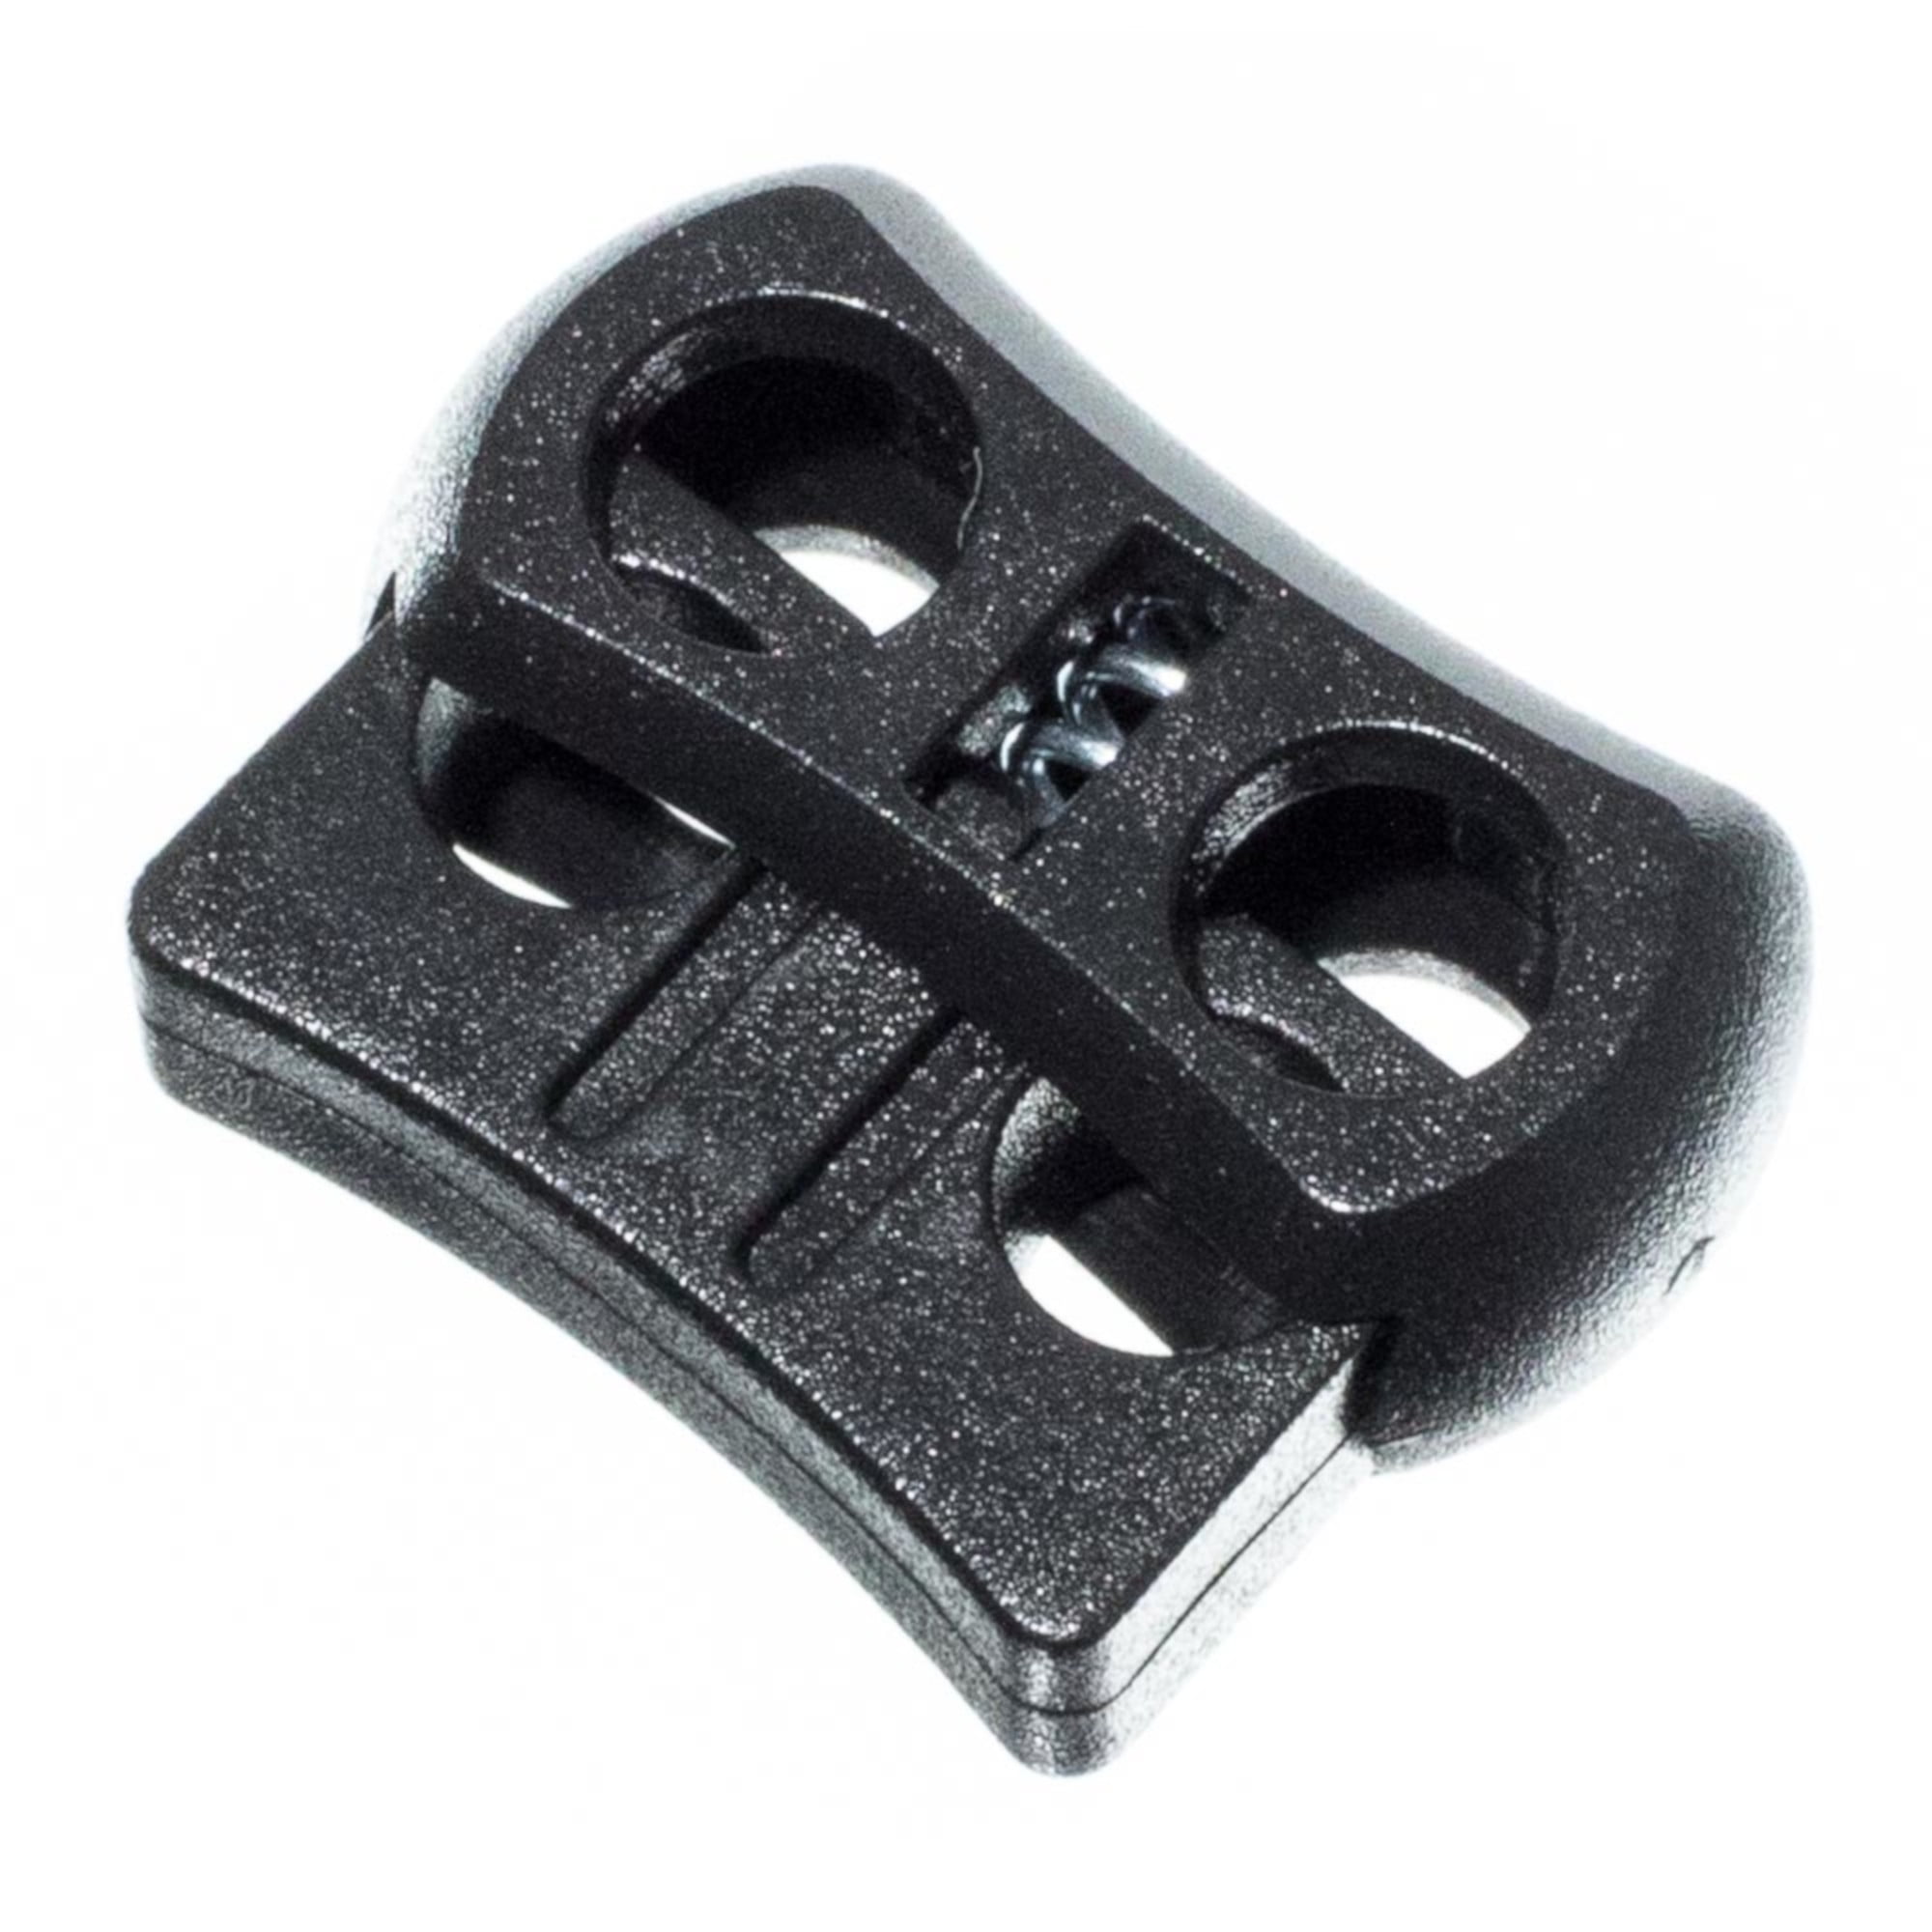 PARACORD PLANET Cube Cord Lock Plastic Spring Stop Cube Toggle Stoppers 